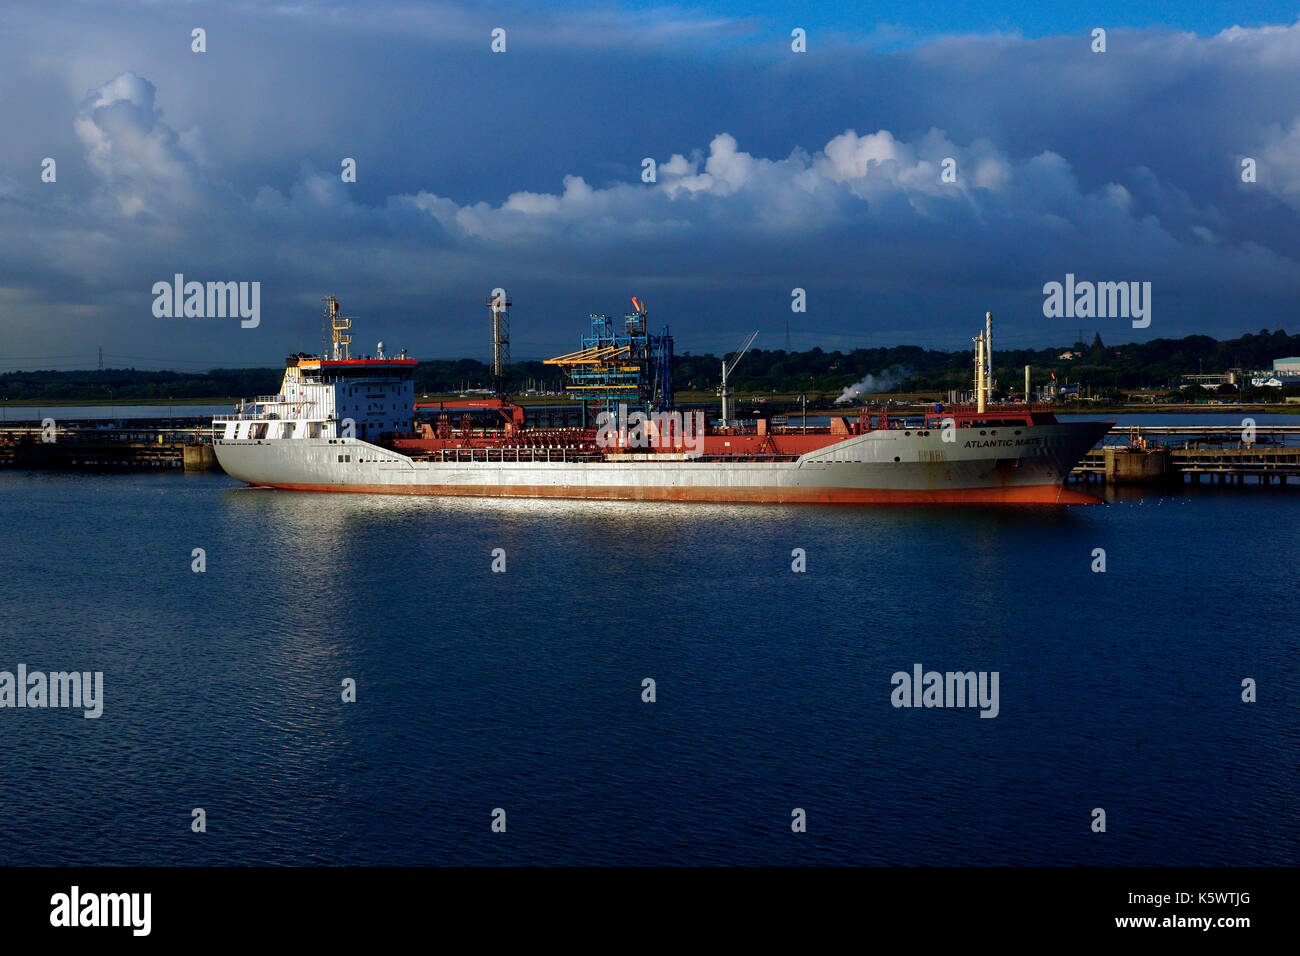 CHEMICAL - OIL PRODUCTS TANKER 'ATLANTIC MATE' Stock Photo - Alamy